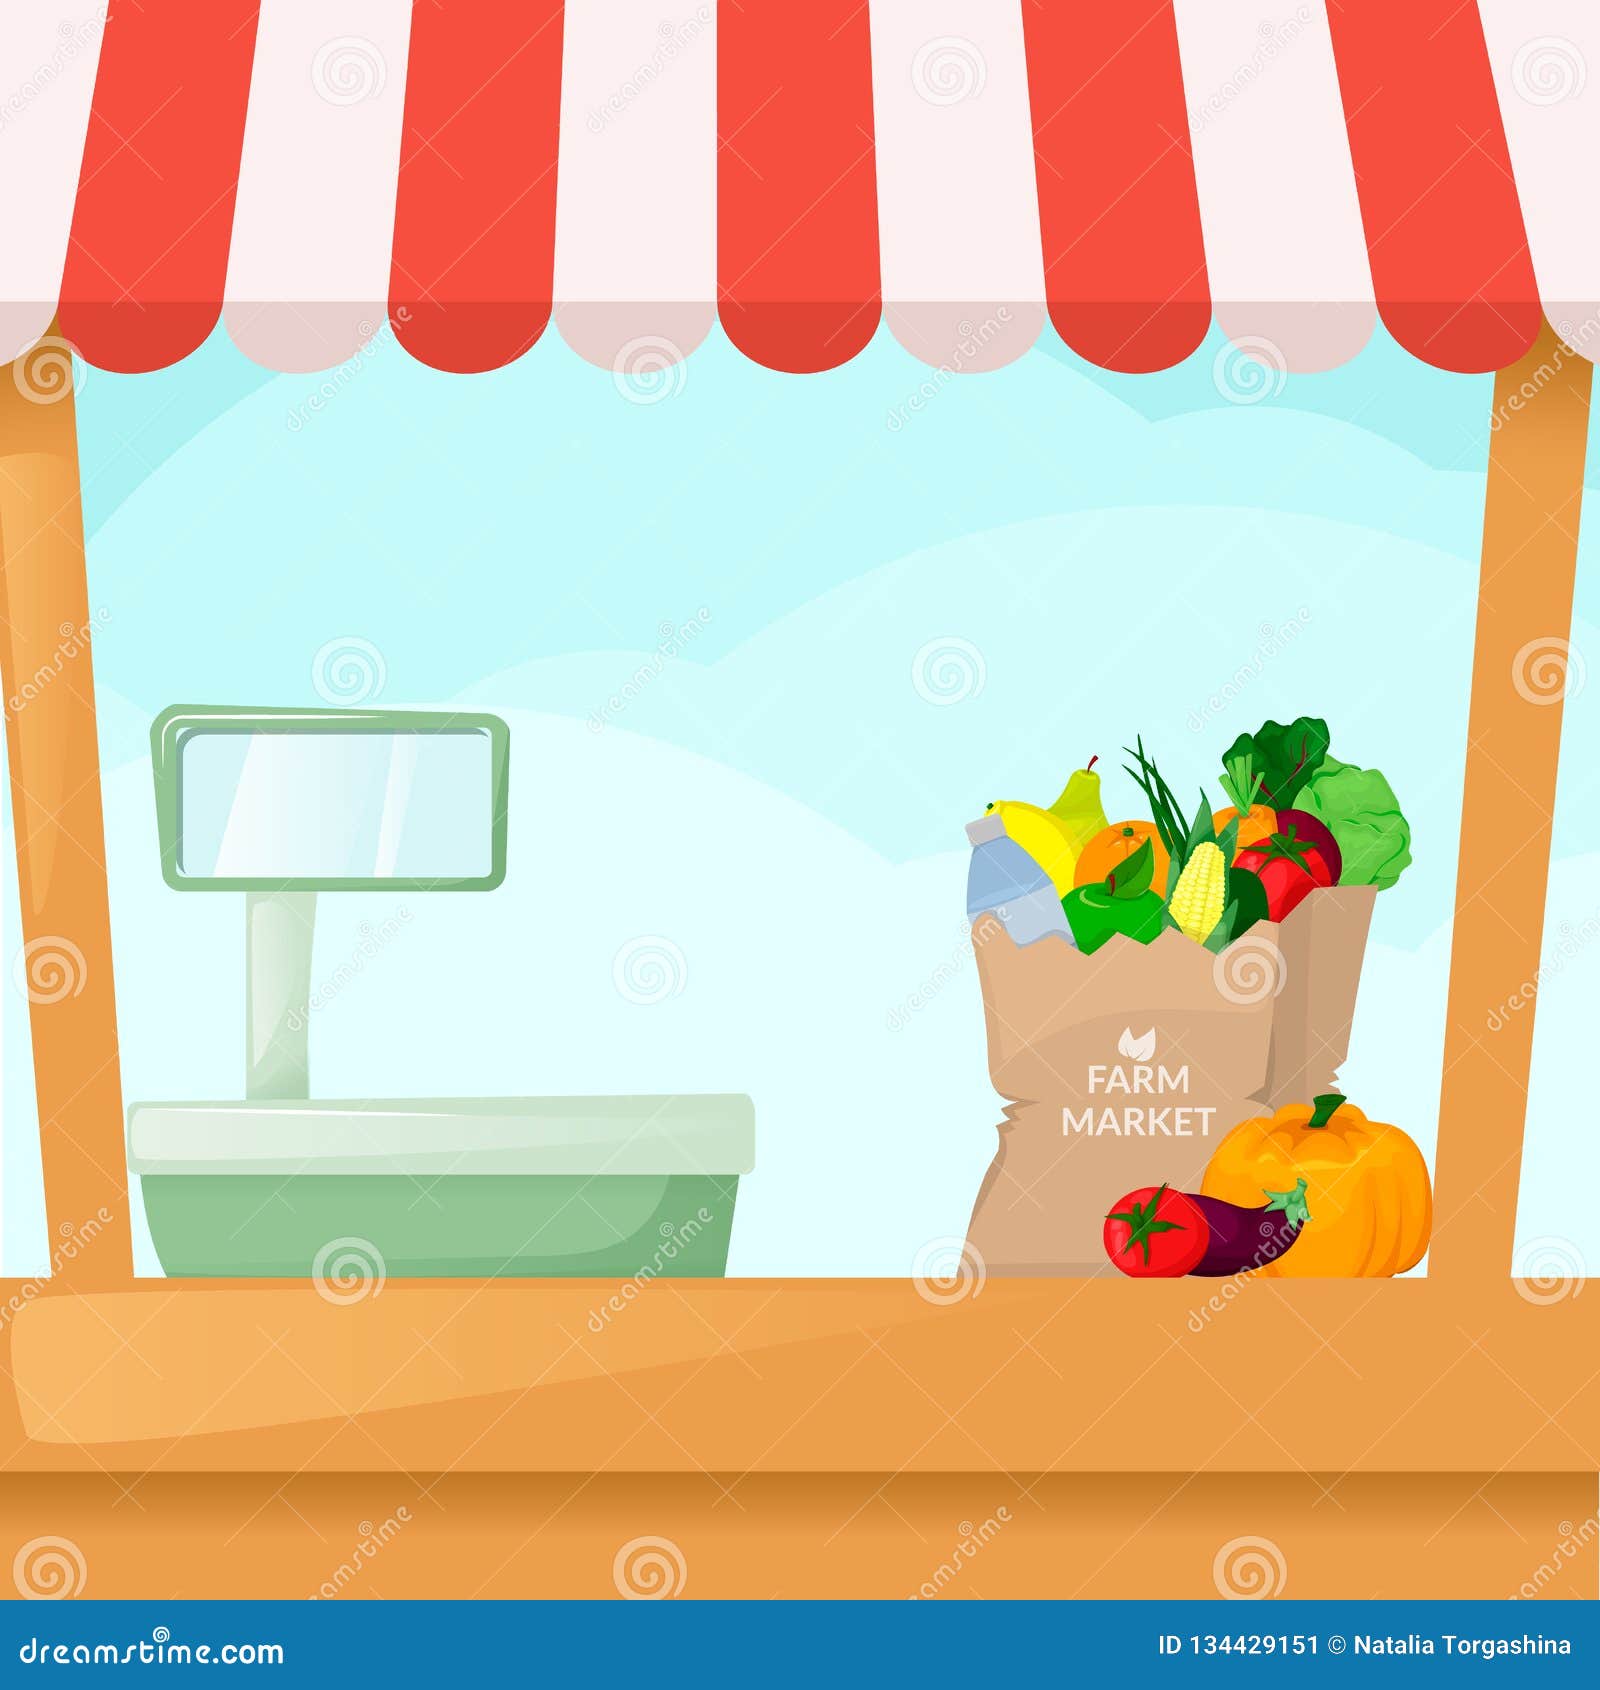 Farmers  Organic Local Shop. Selling Fruit and Vegetables.  Produce Stands Stock Vector - Illustration of graphic, apron: 134429151